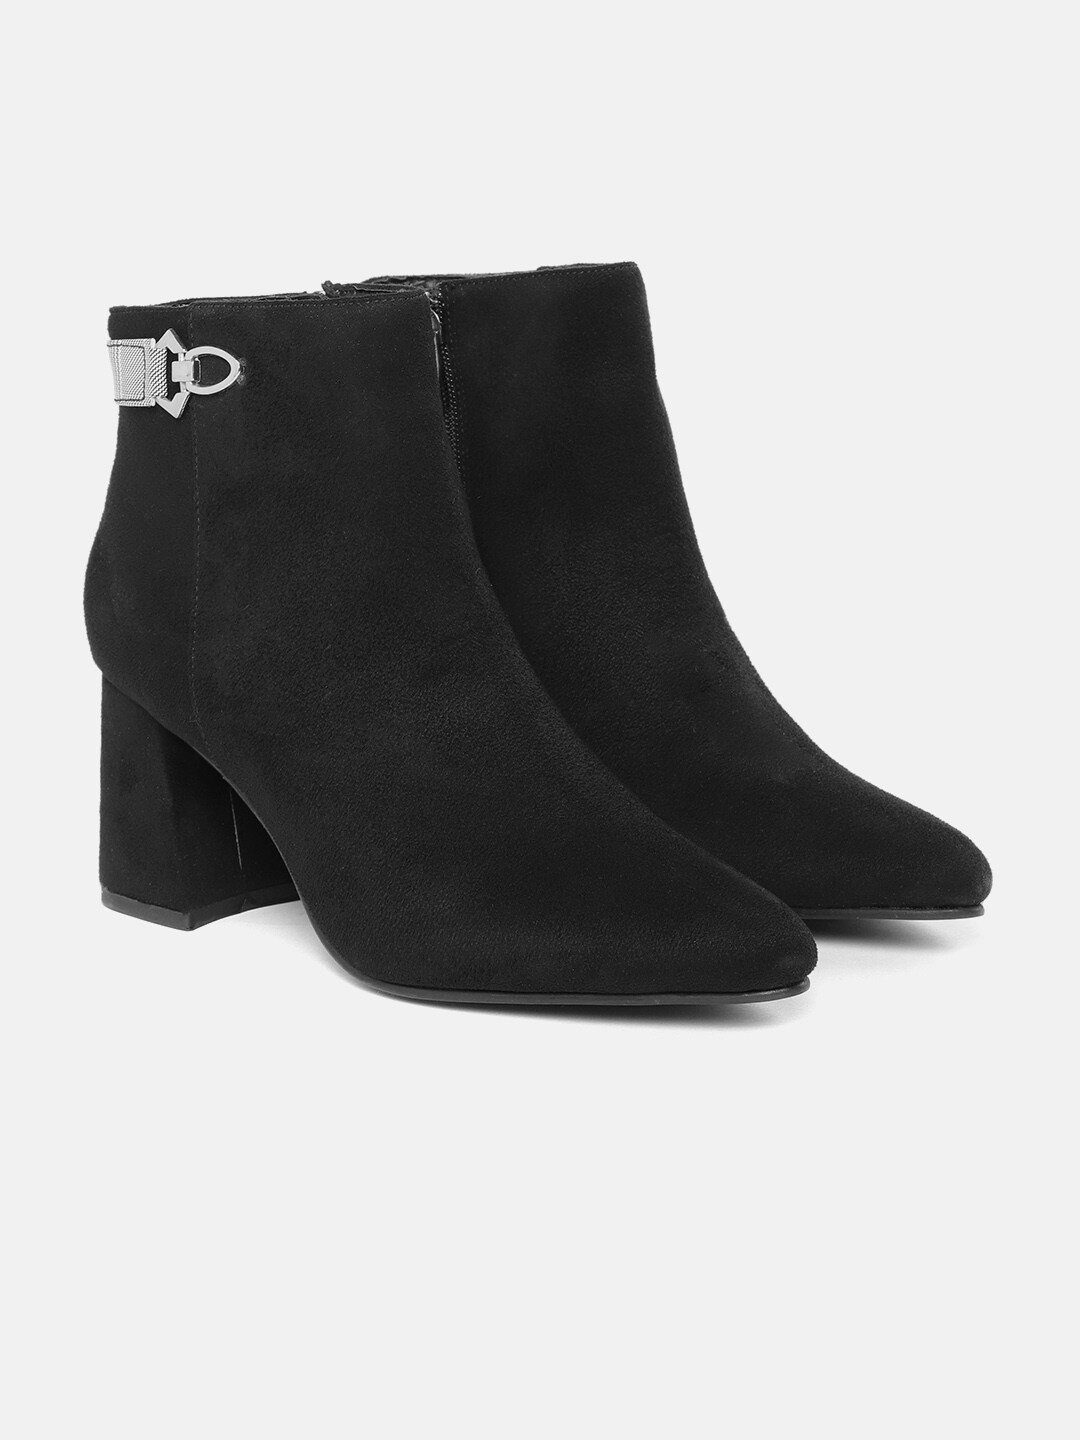 DressBerry Women Black Solid Mid-Top Heeled Boots Price in India